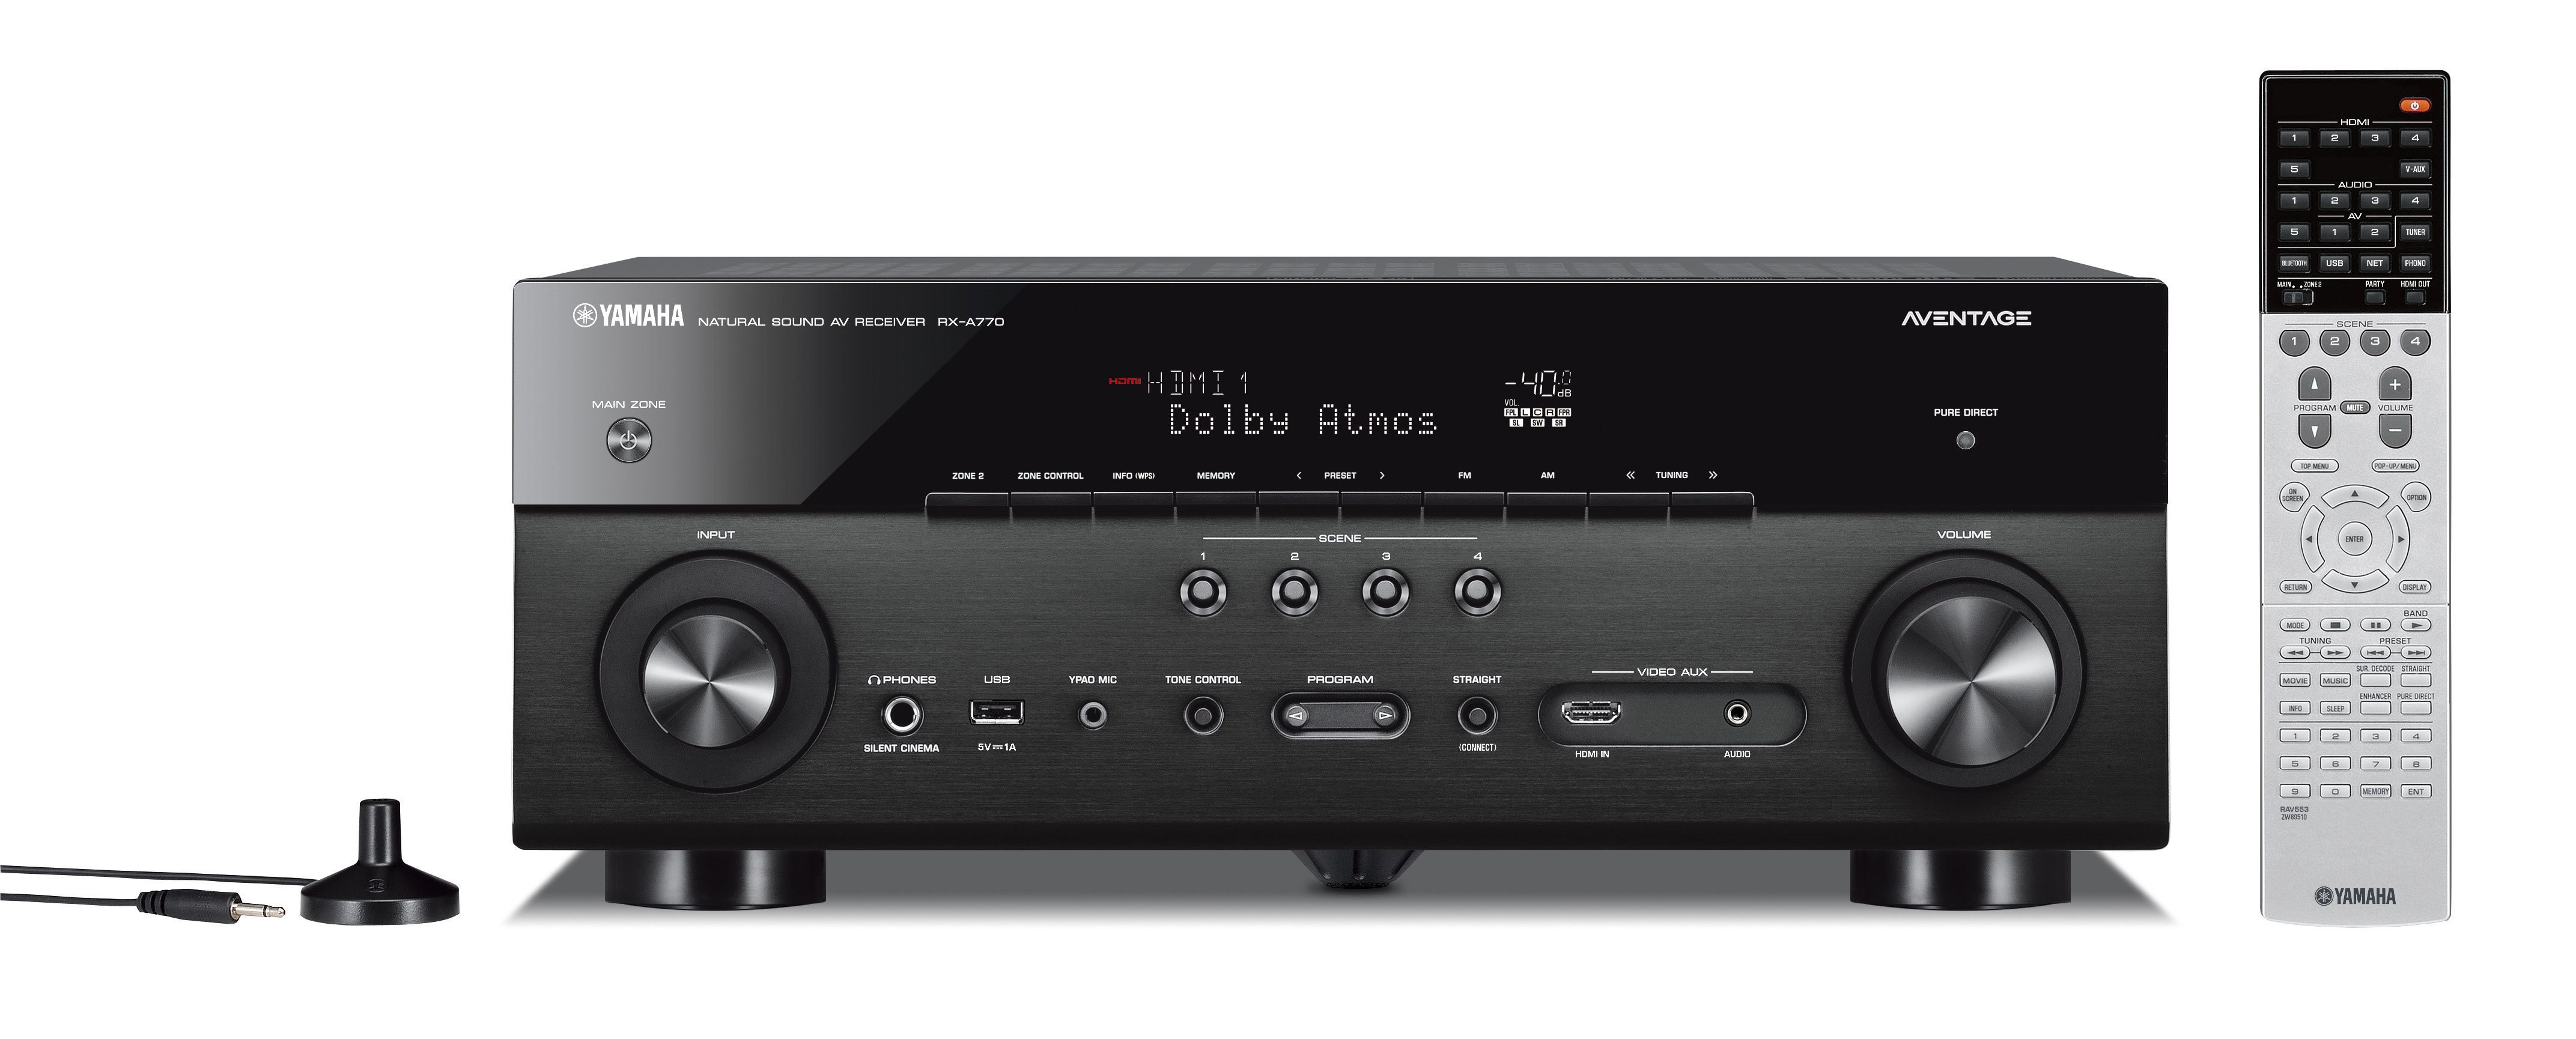 RX-A770 - Downloads - AV Receivers - Audio & Visual - Products 